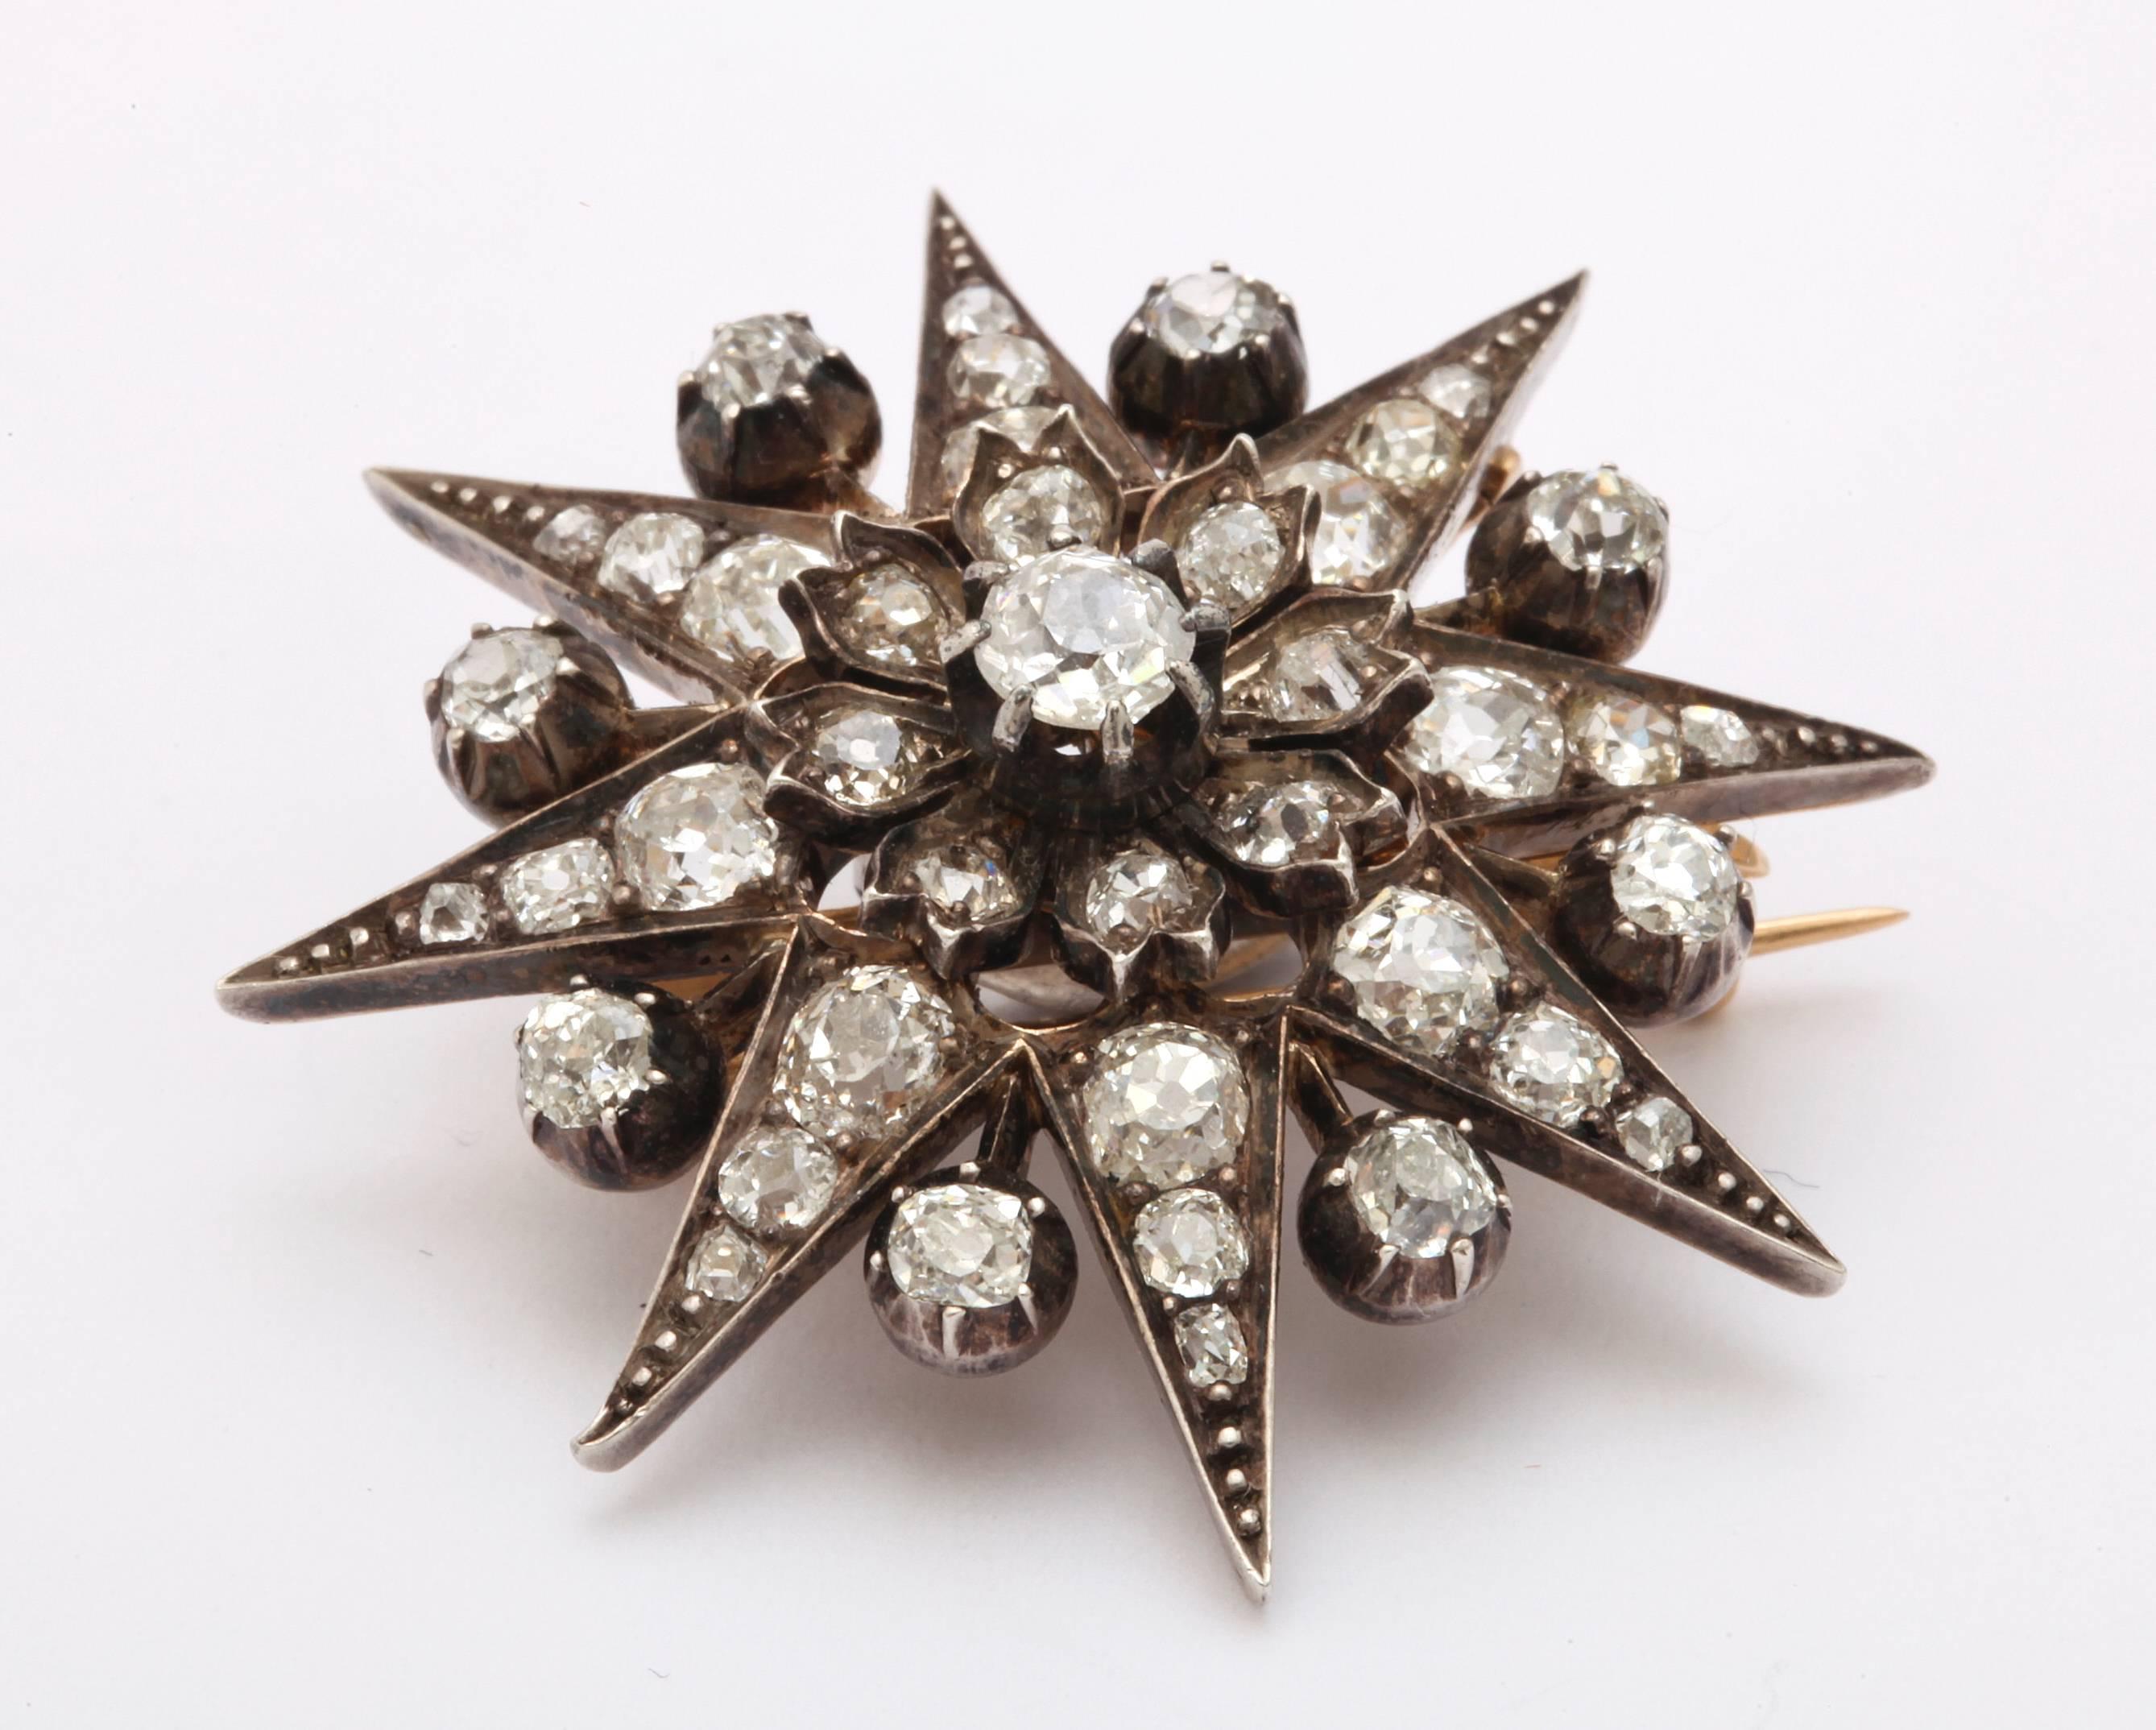 8 pointed star jewelry